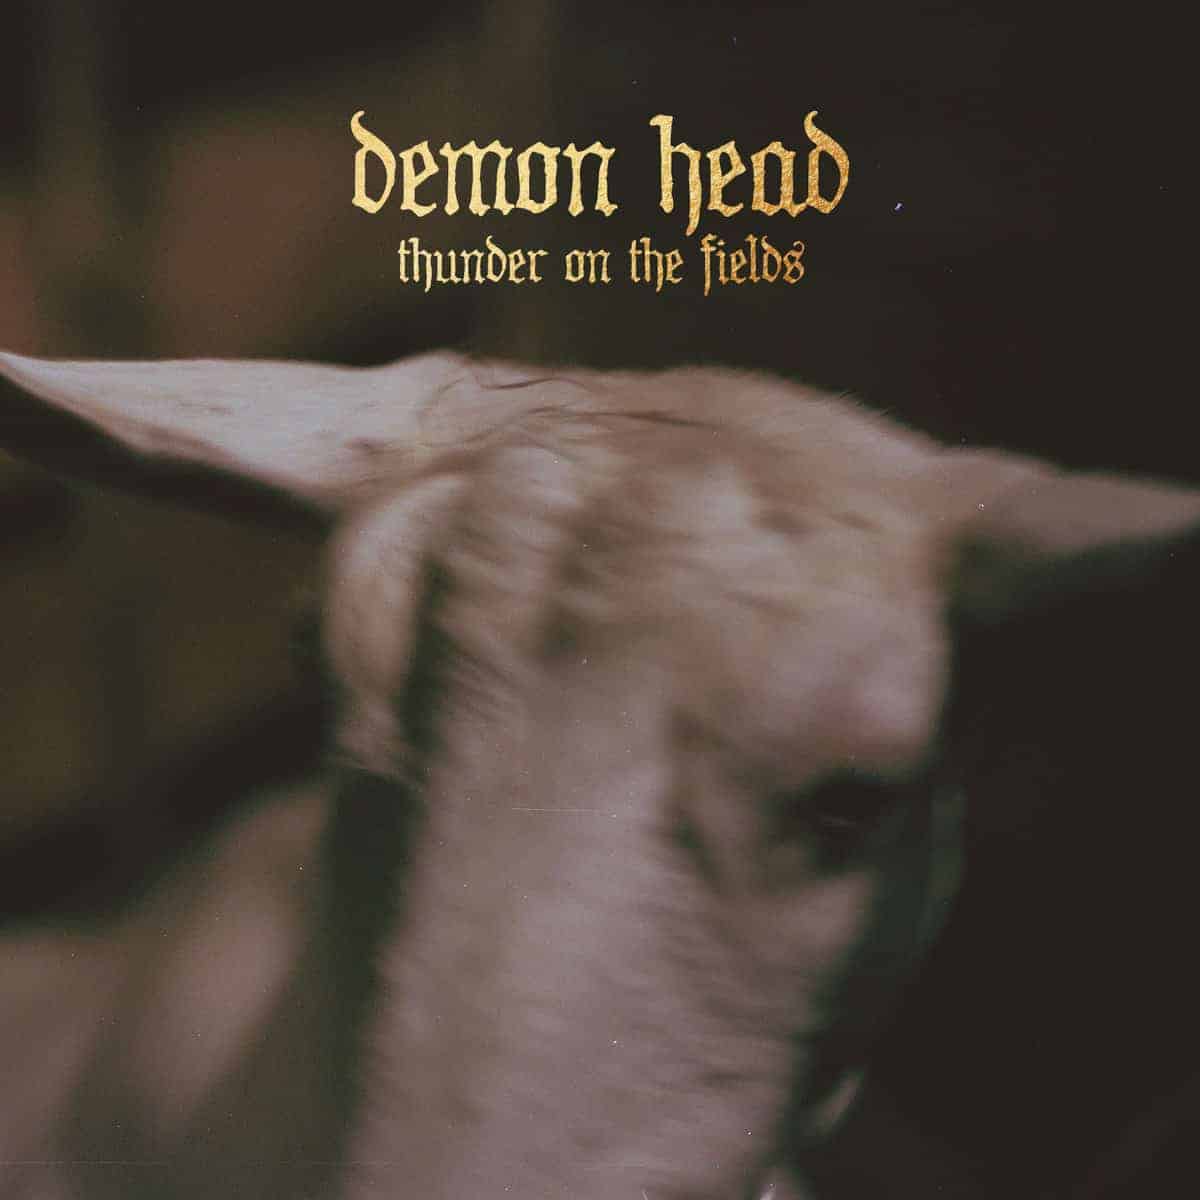 Demon Head - Thunder on the Fields LP/CD (The Sign Records) New Demon Head Album on The Sign Records! Vinyl comes in gatefold cover with gold foil finish.